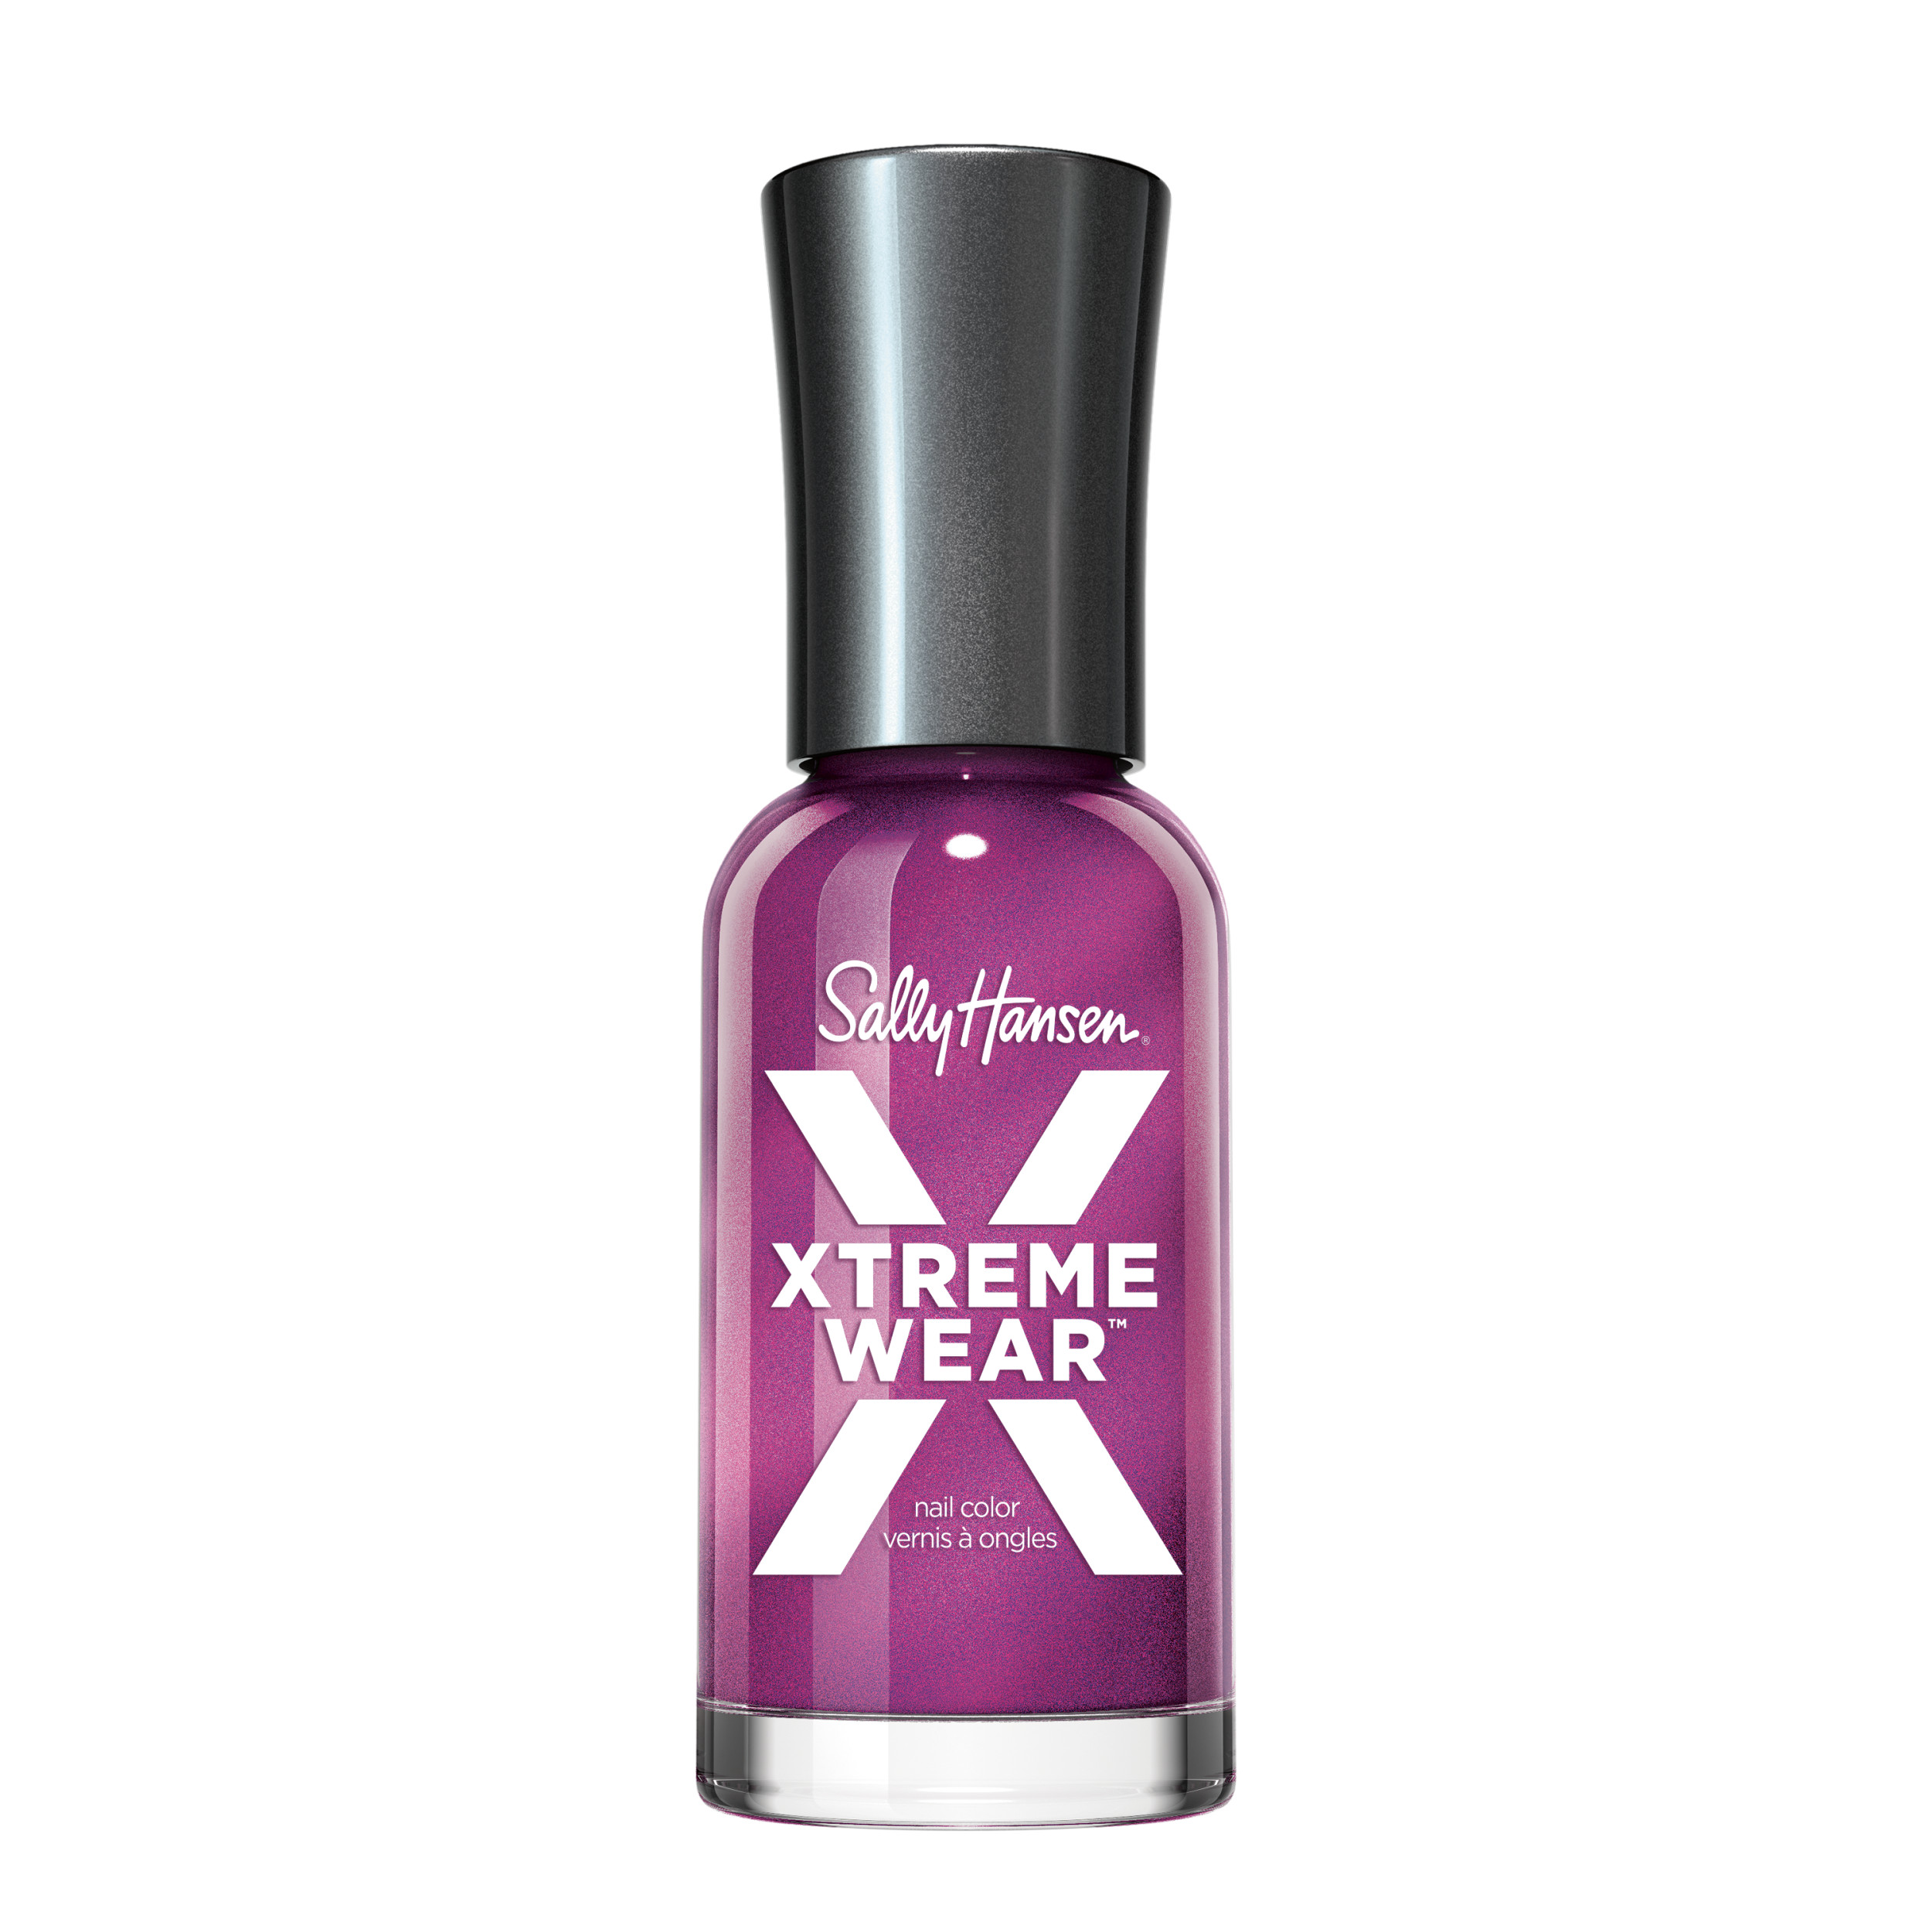 Sally Hansen Xtreme Wear Nail Polish, Berry Bright, 0.4 oz, Chip Resistant, Bold Color - image 1 of 14